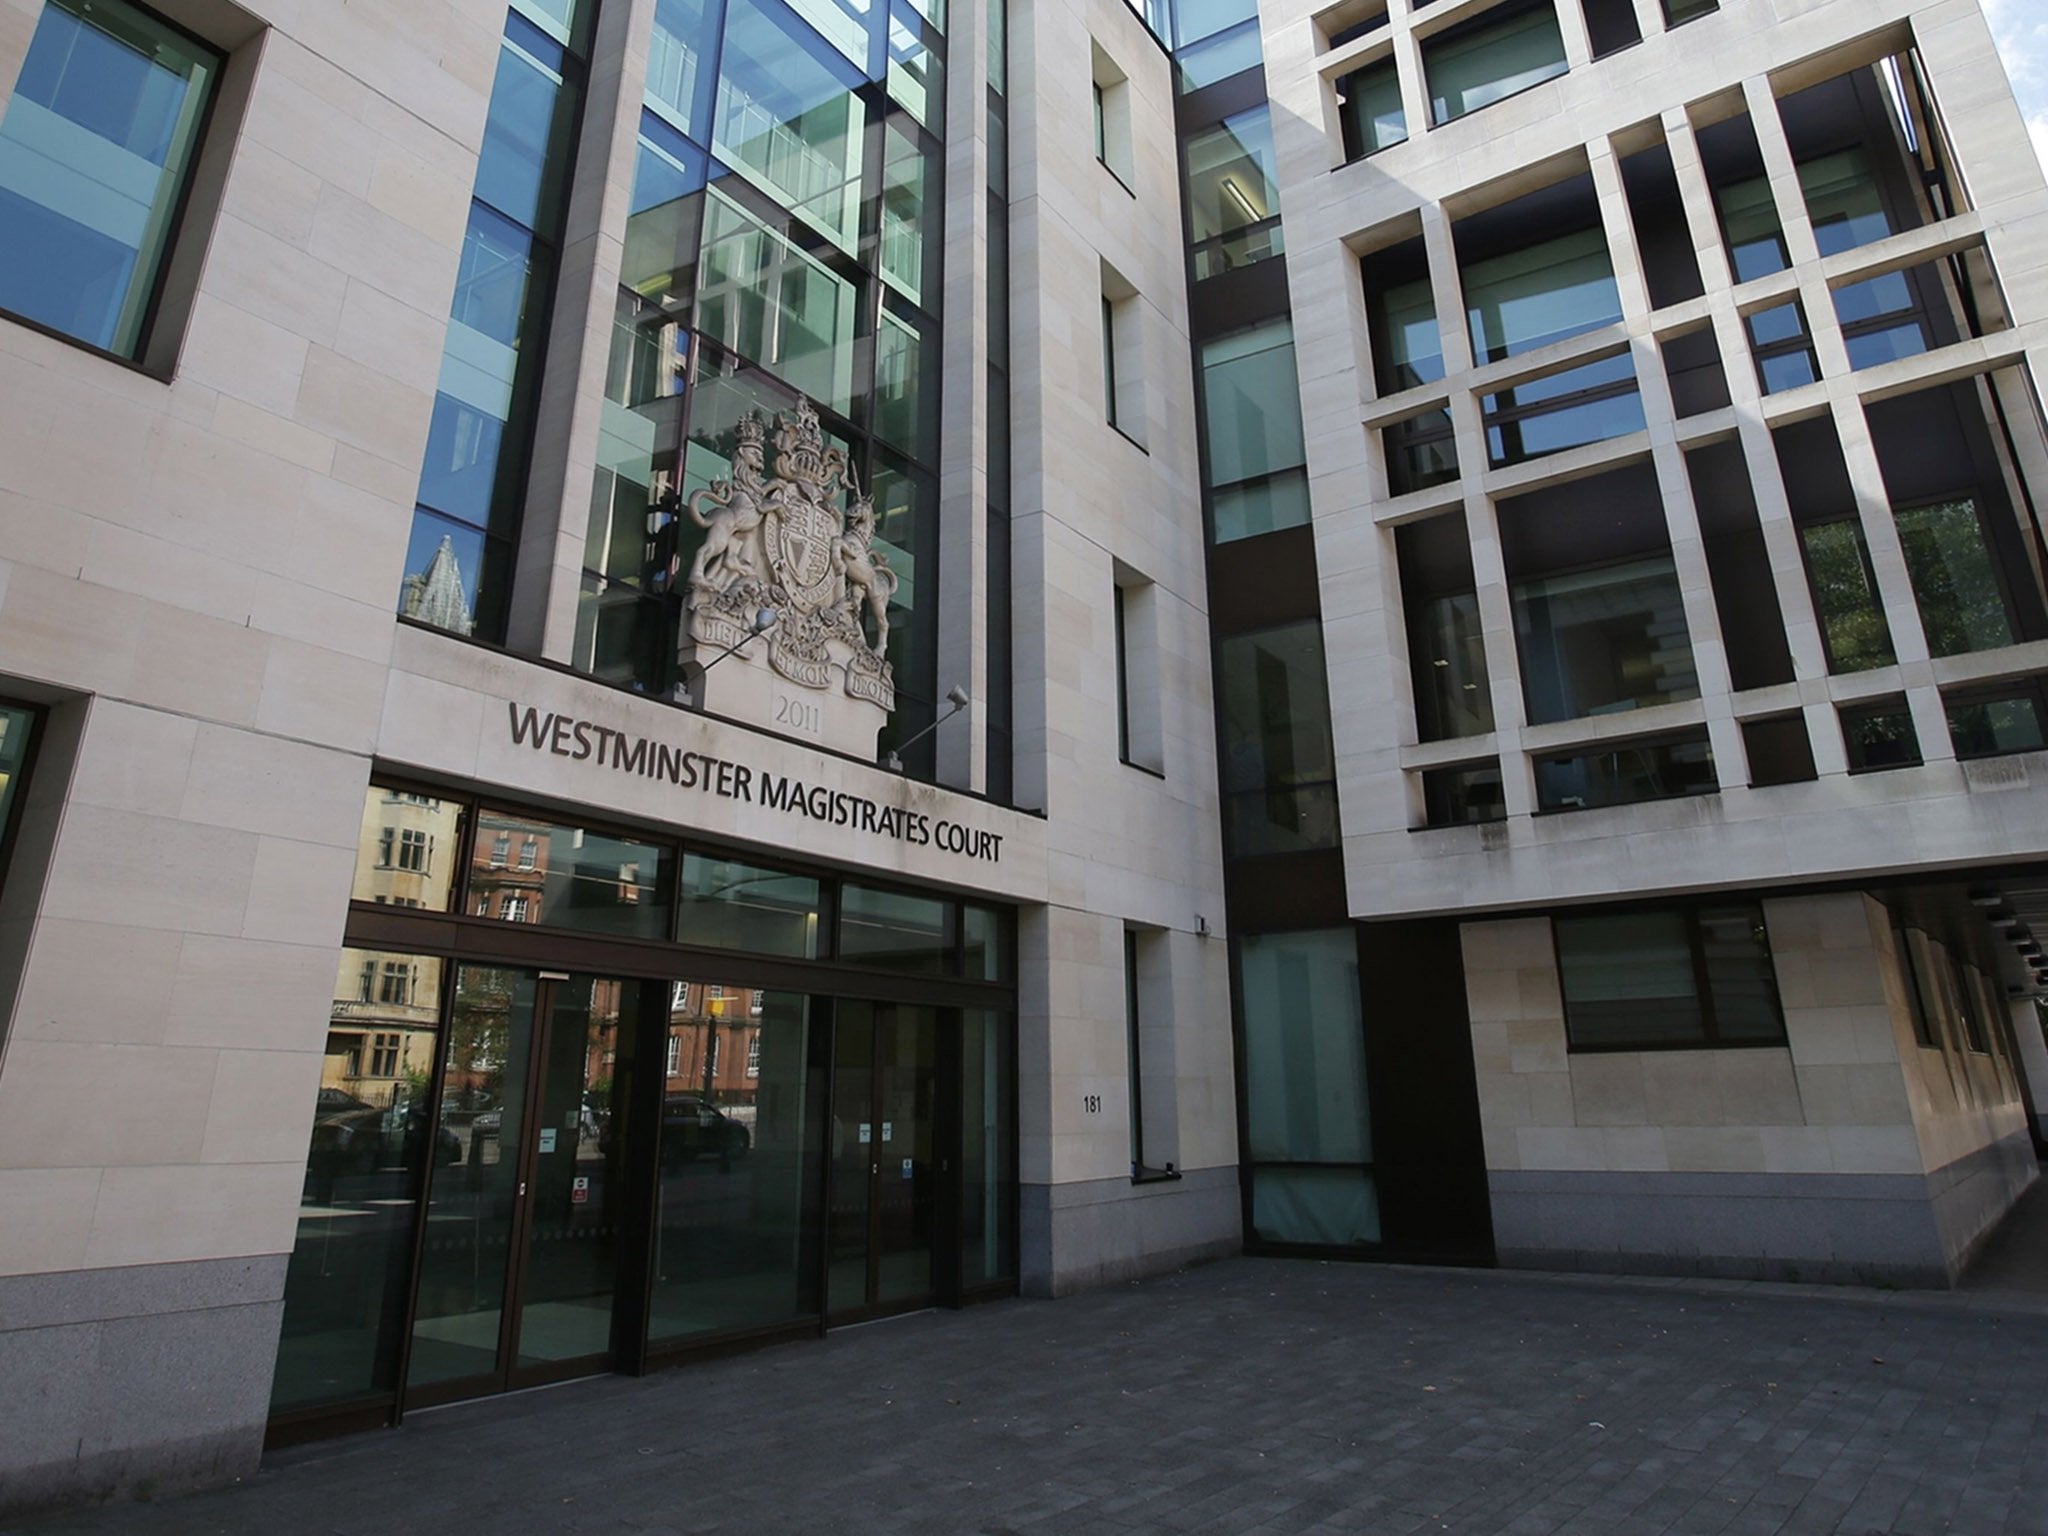 Suspects Garry Jack, Daniel Ward and a 17 year-old man are due to appear at Westminster Magistrates’ Court on Tuesday